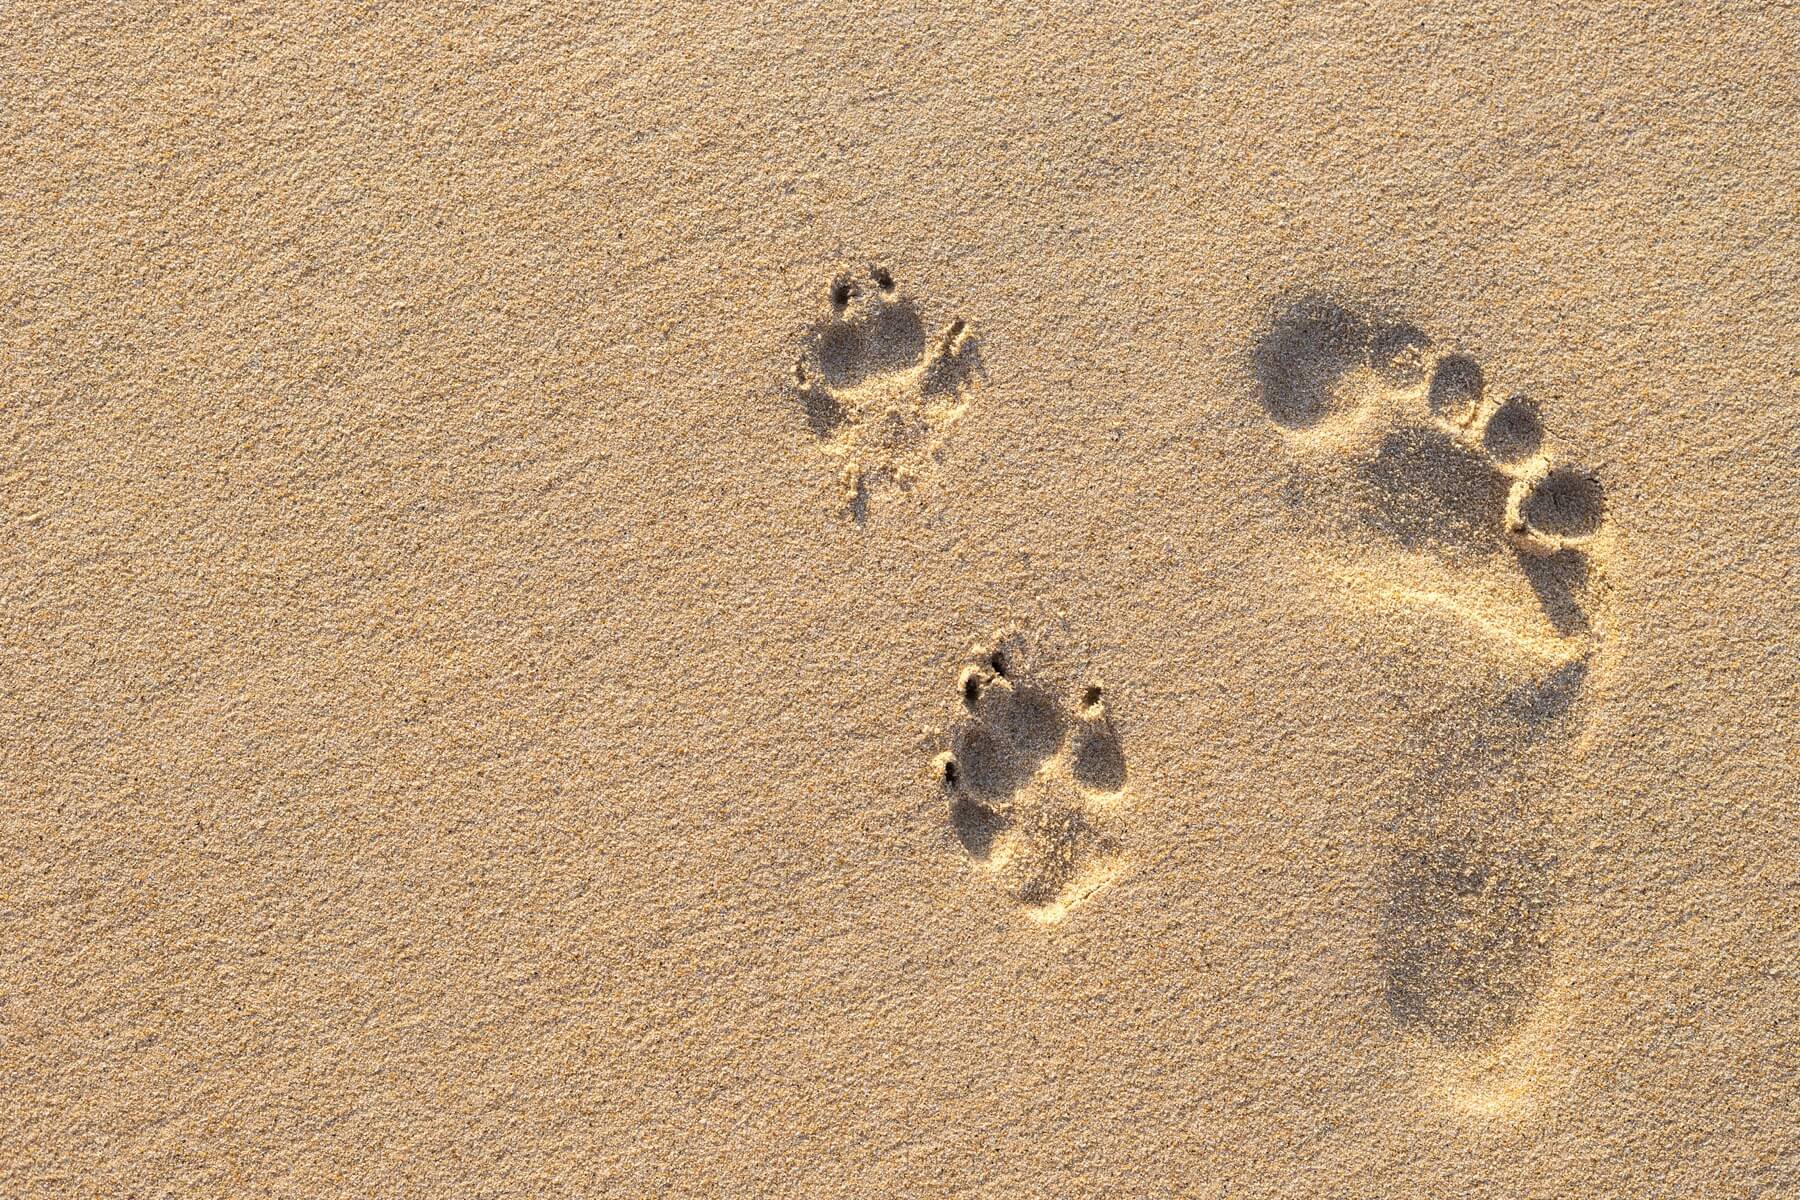 Animal paw and footprint in sand